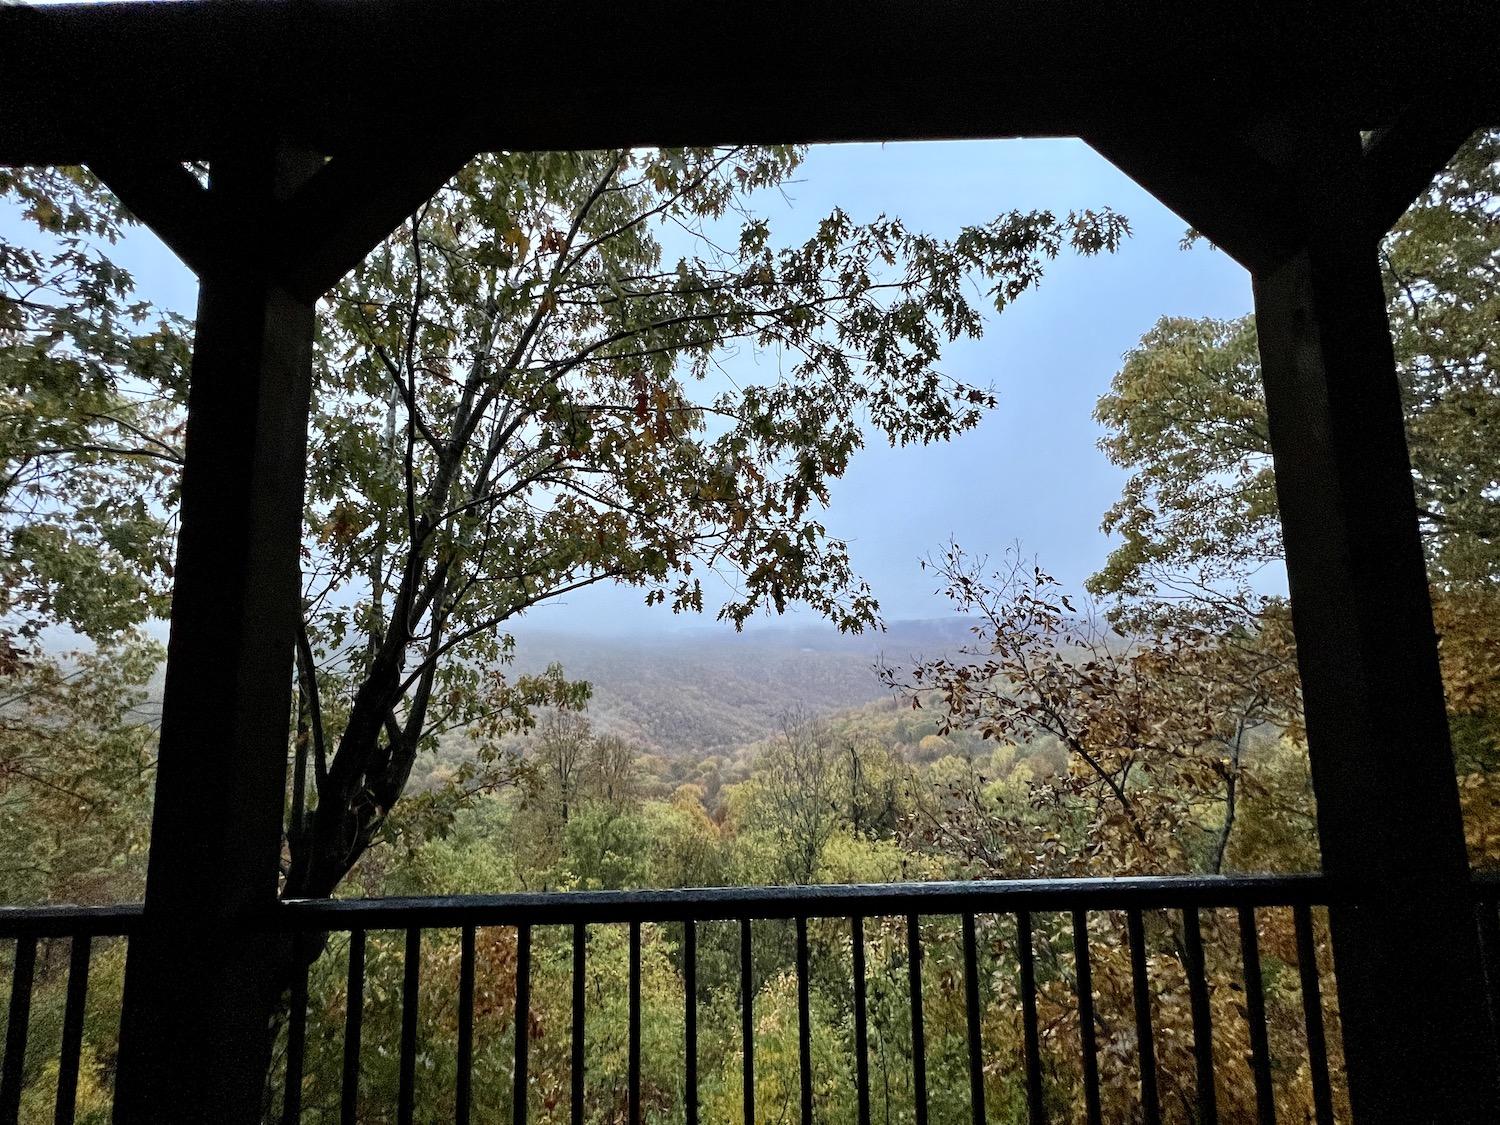 The view of the Buffalo River wilderness from the Buffalo Outdoor Center's Foxfire Cabin.